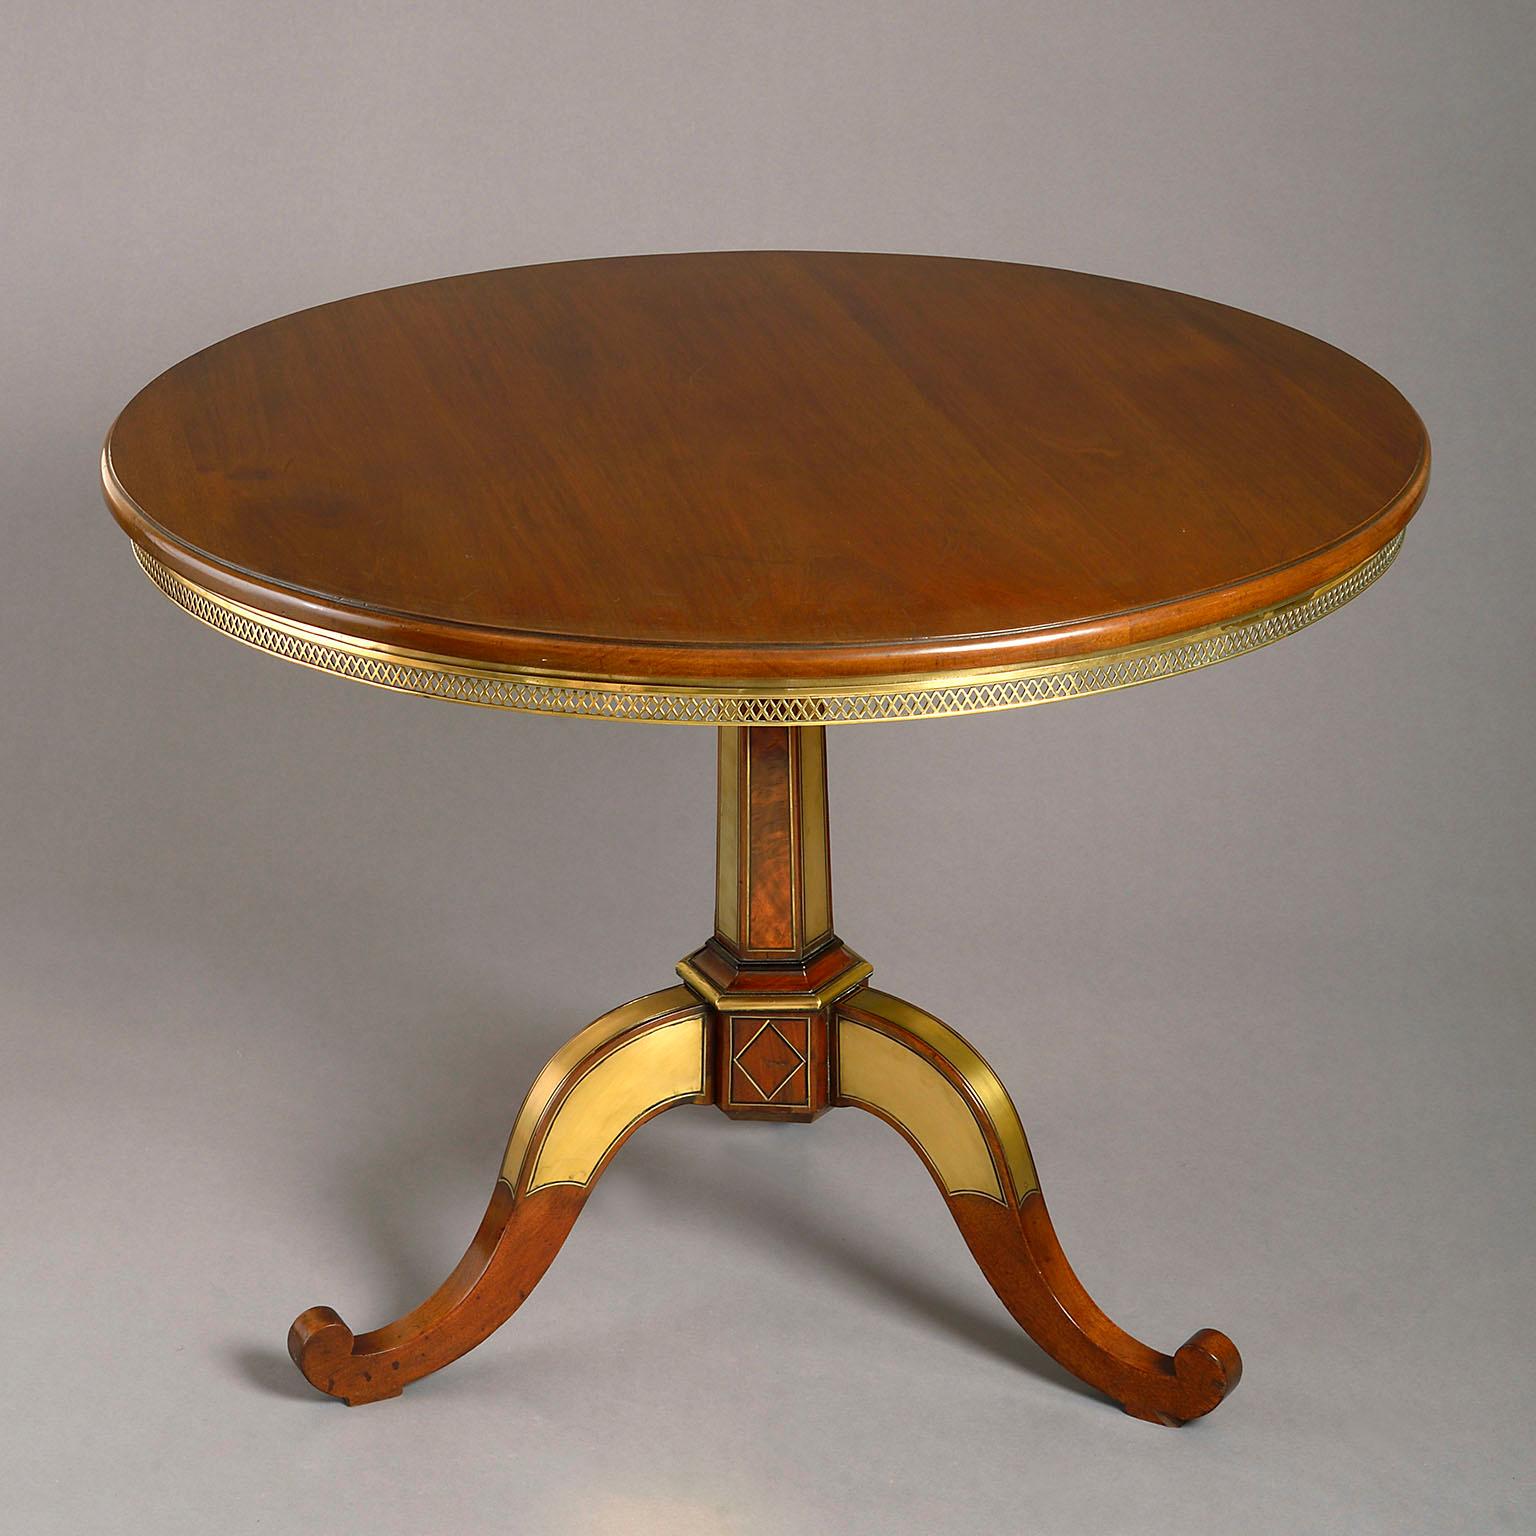 Russian brass inlaid mahogany gueridon table, the moulded circular top with unusual brass fretwork apron supported on a faceted tapering stem inlaid with alternating panels of brass and flame mahogany standing on a scrolling tripod base, also inlaid